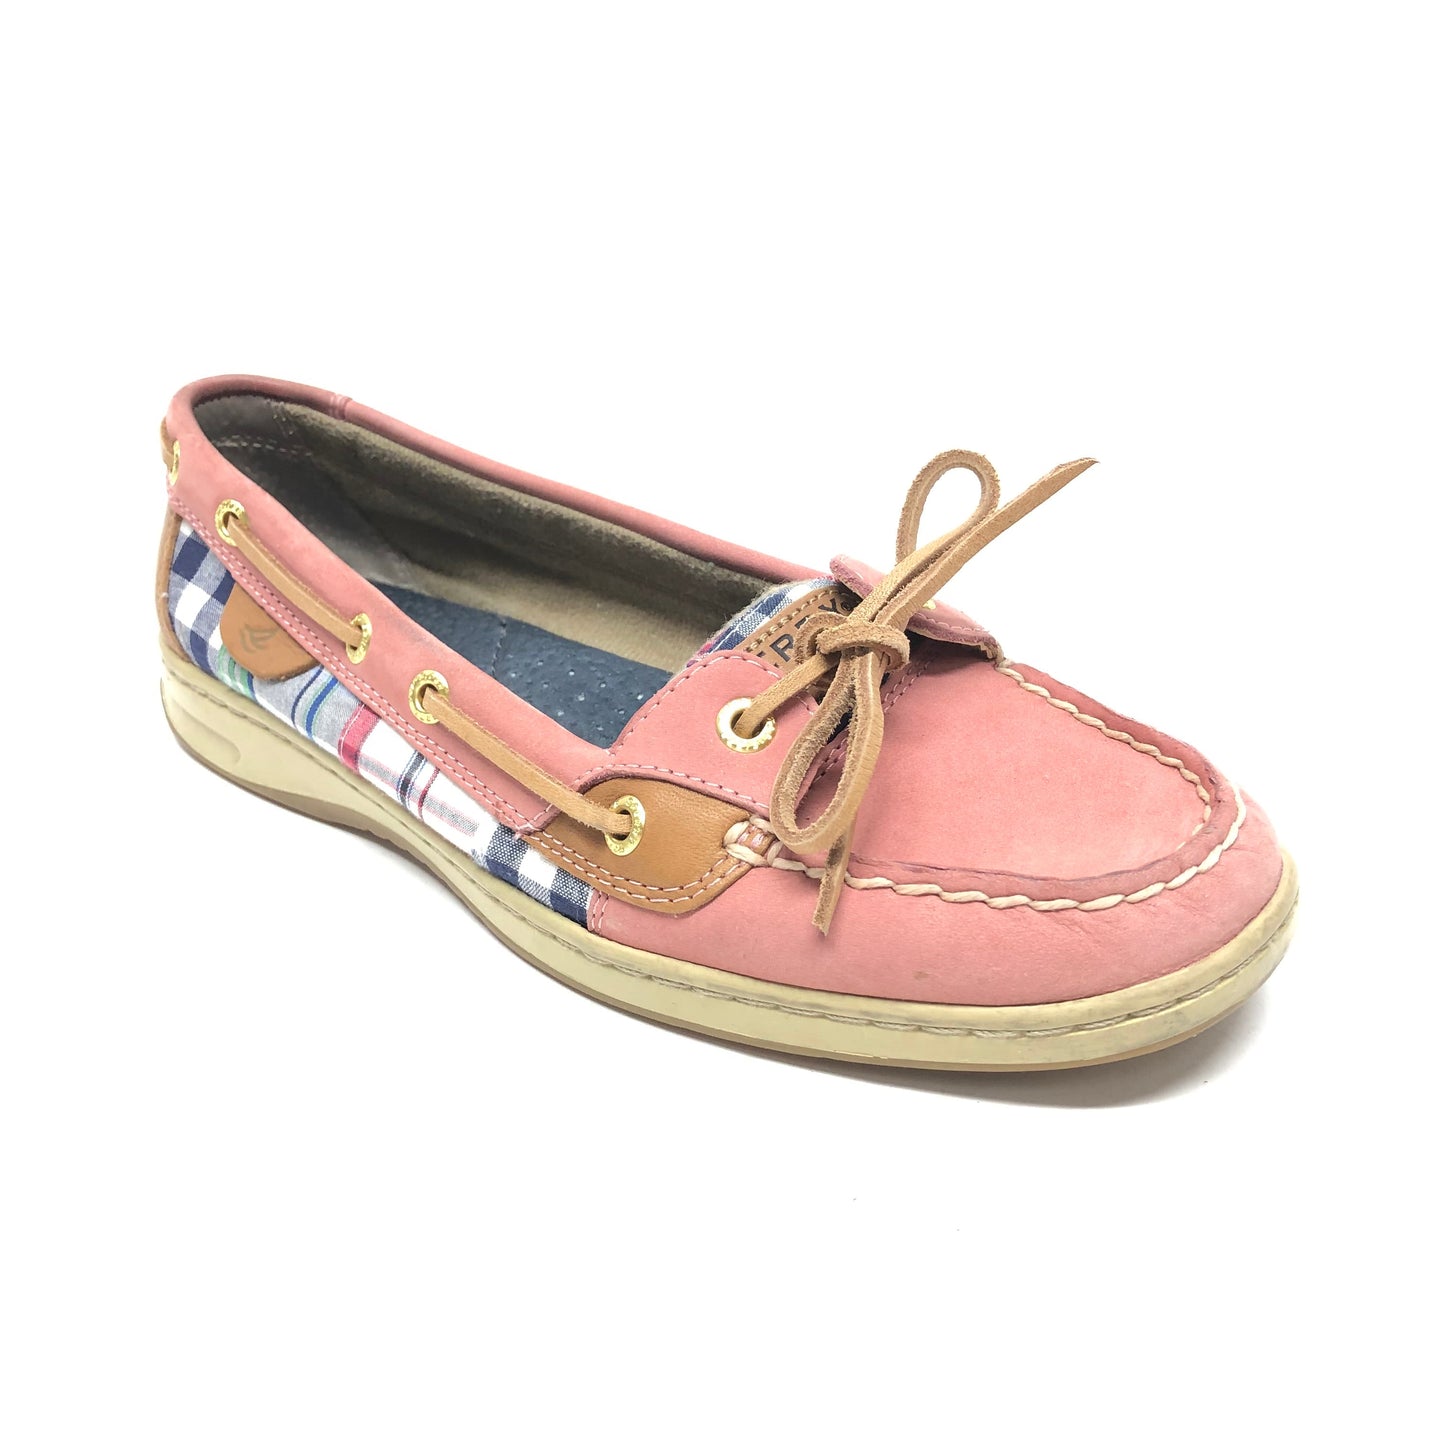 Pink Shoes Flats Sperry, Size 8.5